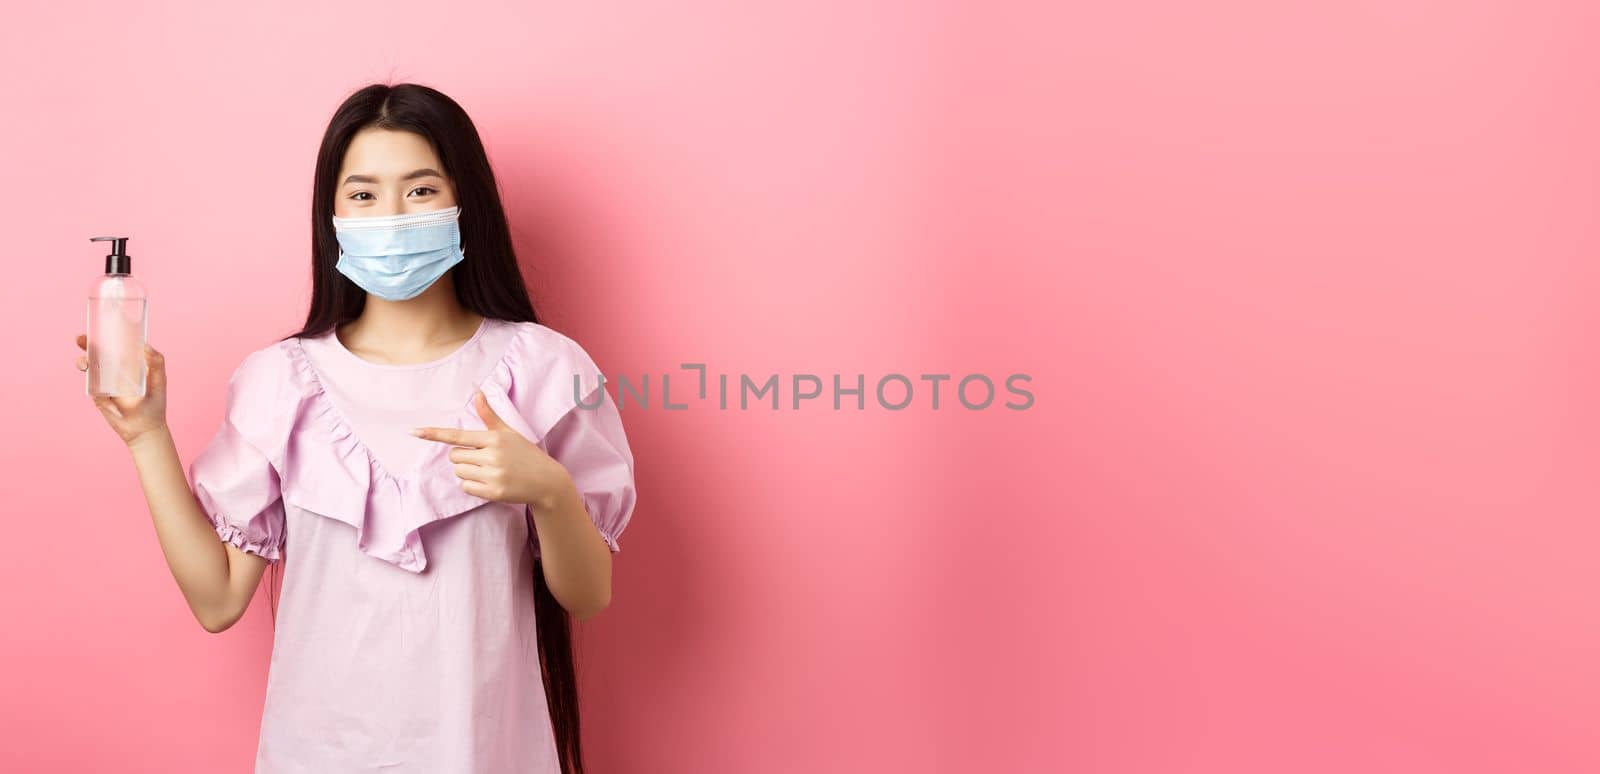 Healthy people and covid-19 pandemic concept. Cheerful asian woman in medical mask recommend hand sanitizer, pointing at antiseptic bottle, white background.